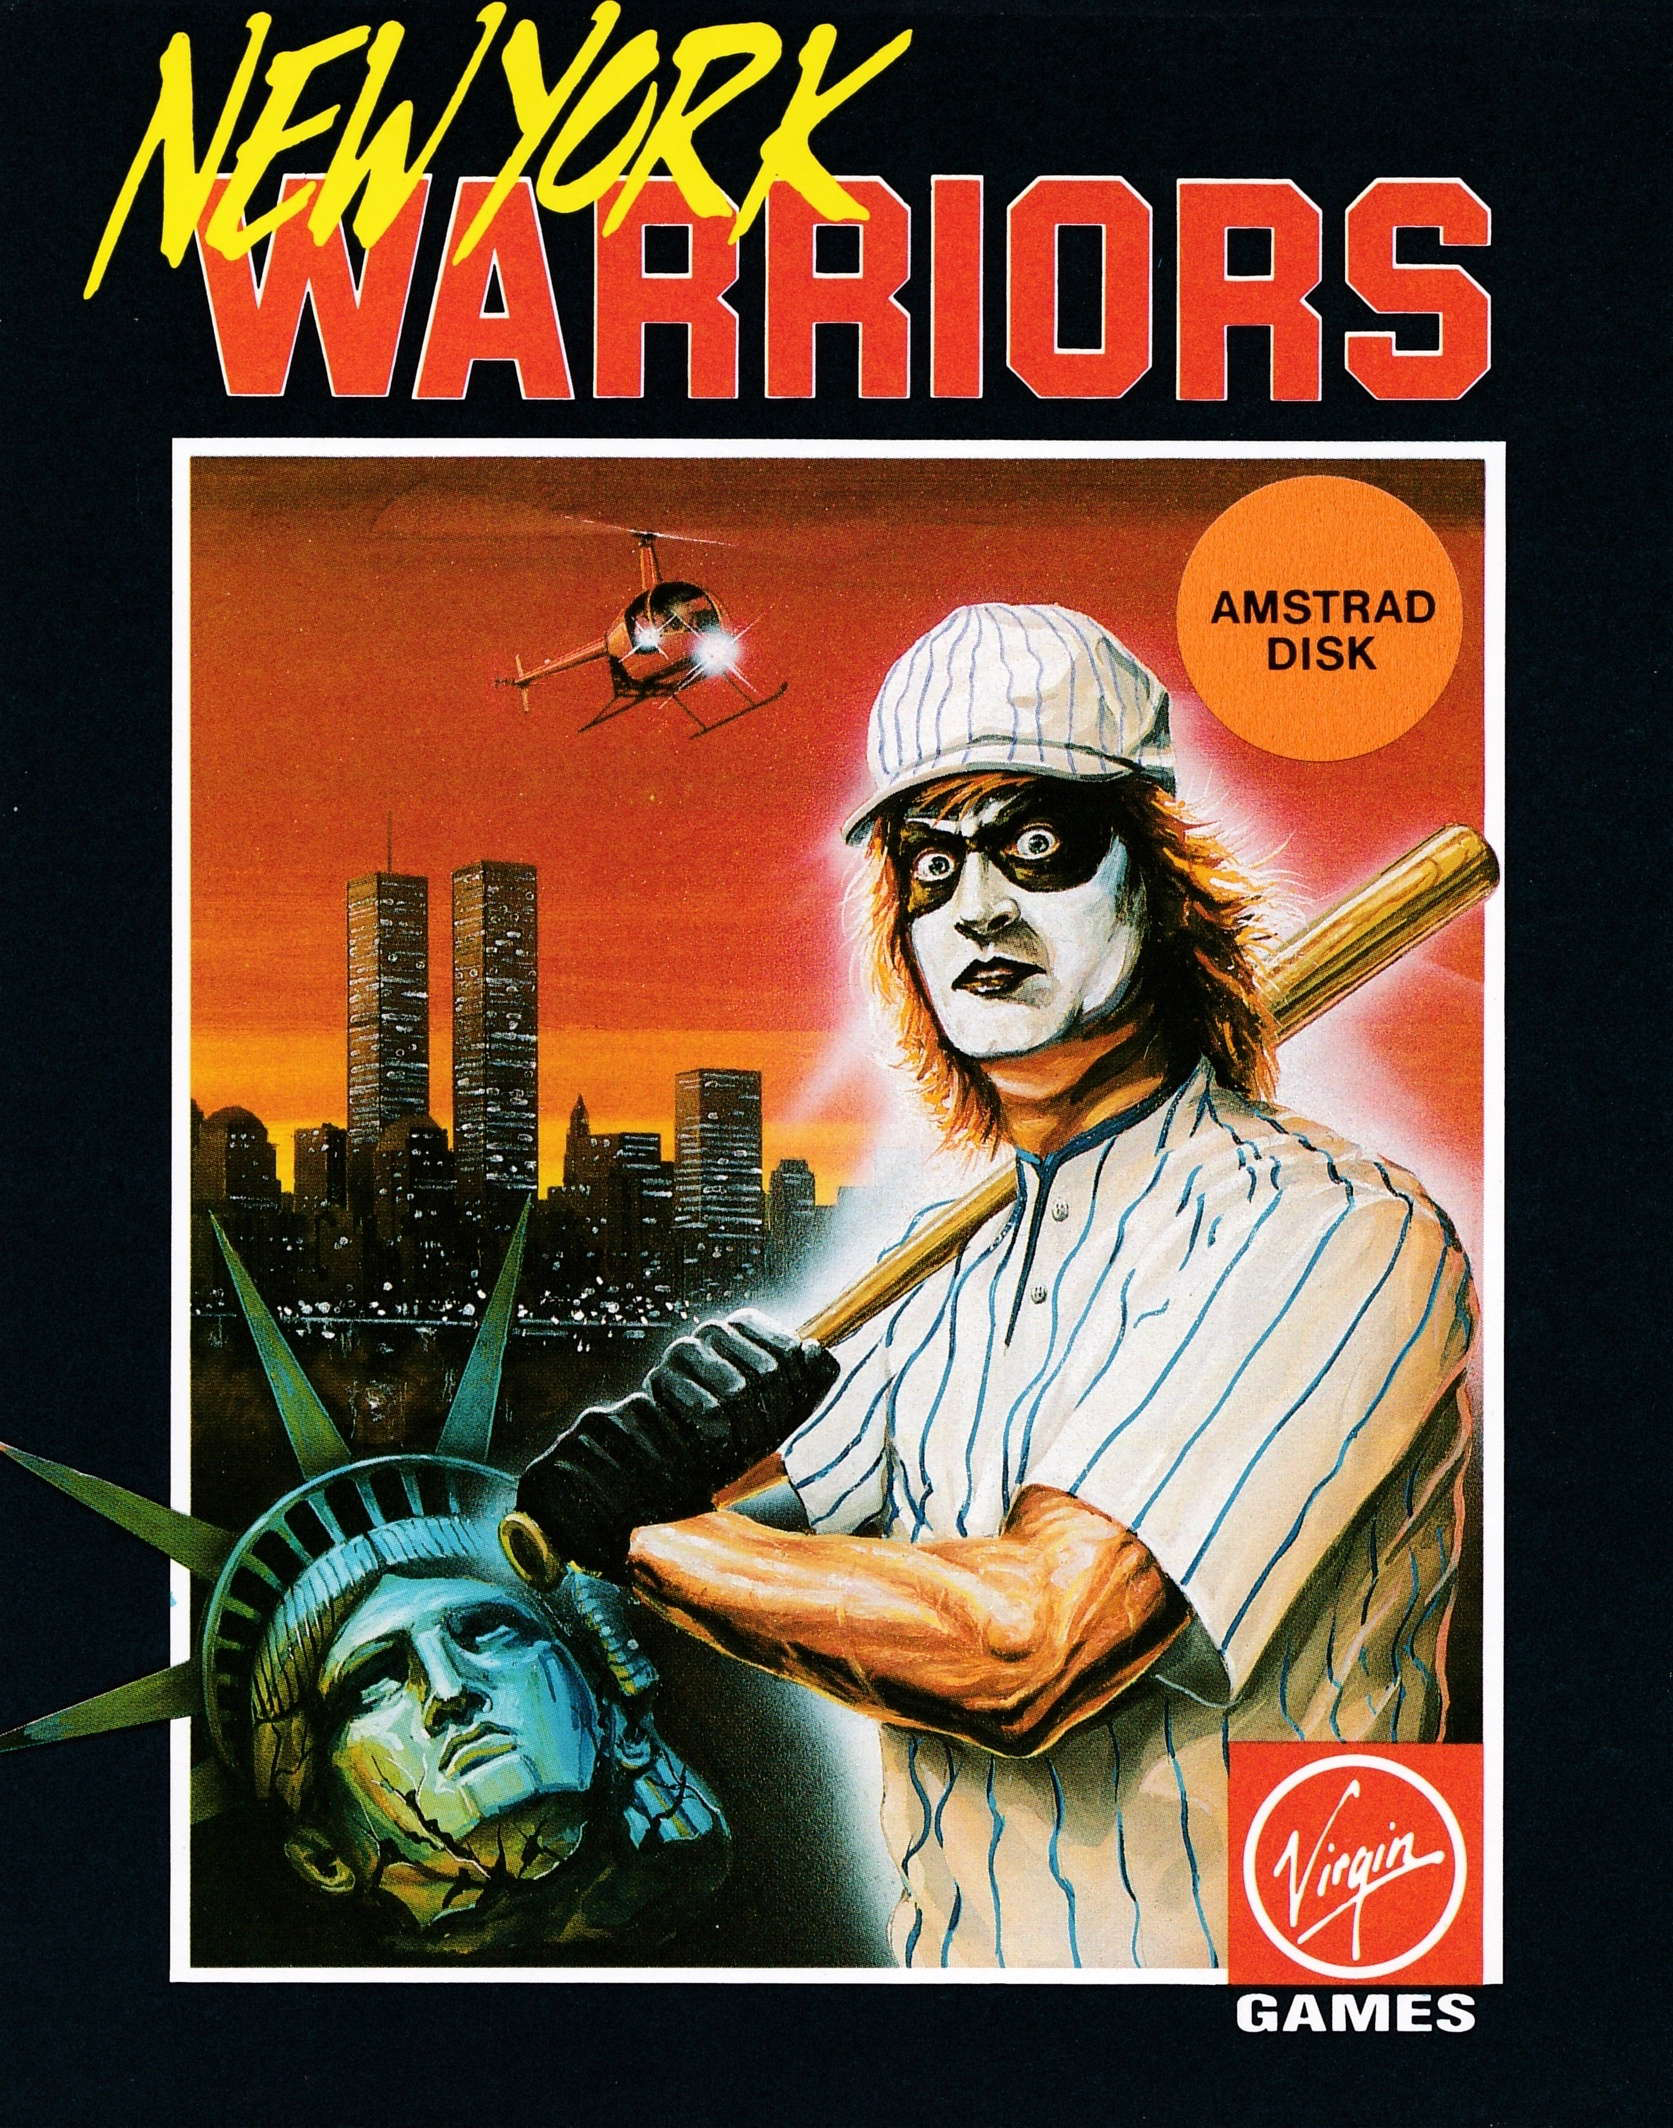 cover of the Amstrad CPC game New York Warriors  by GameBase CPC